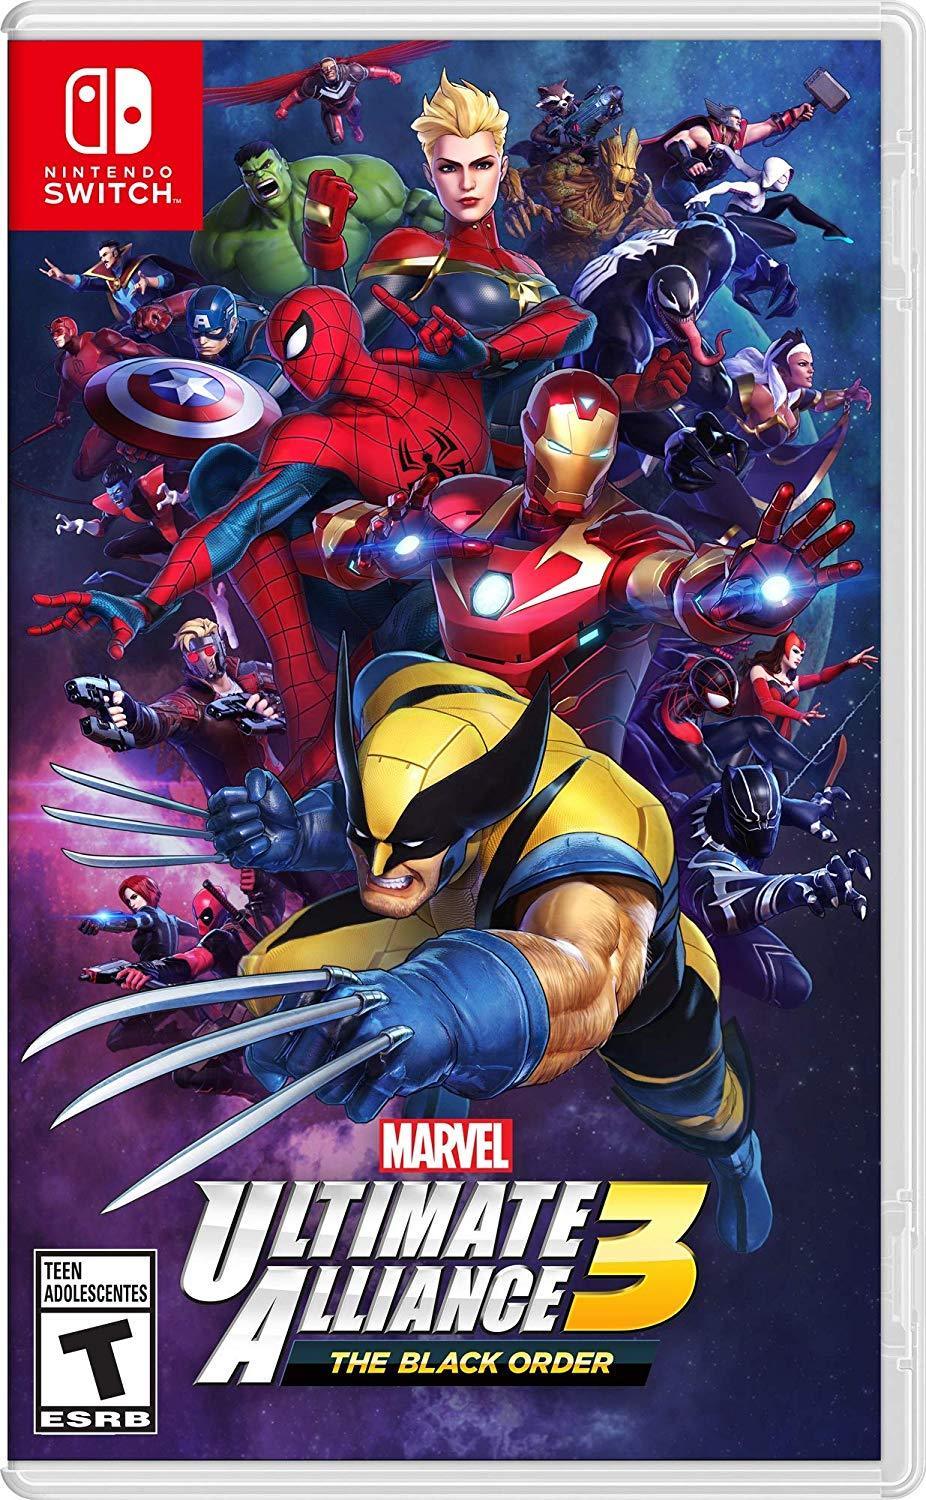 Switch - Marvel Ultimate Alliance 3 The Black Order  - Fisico -Usado